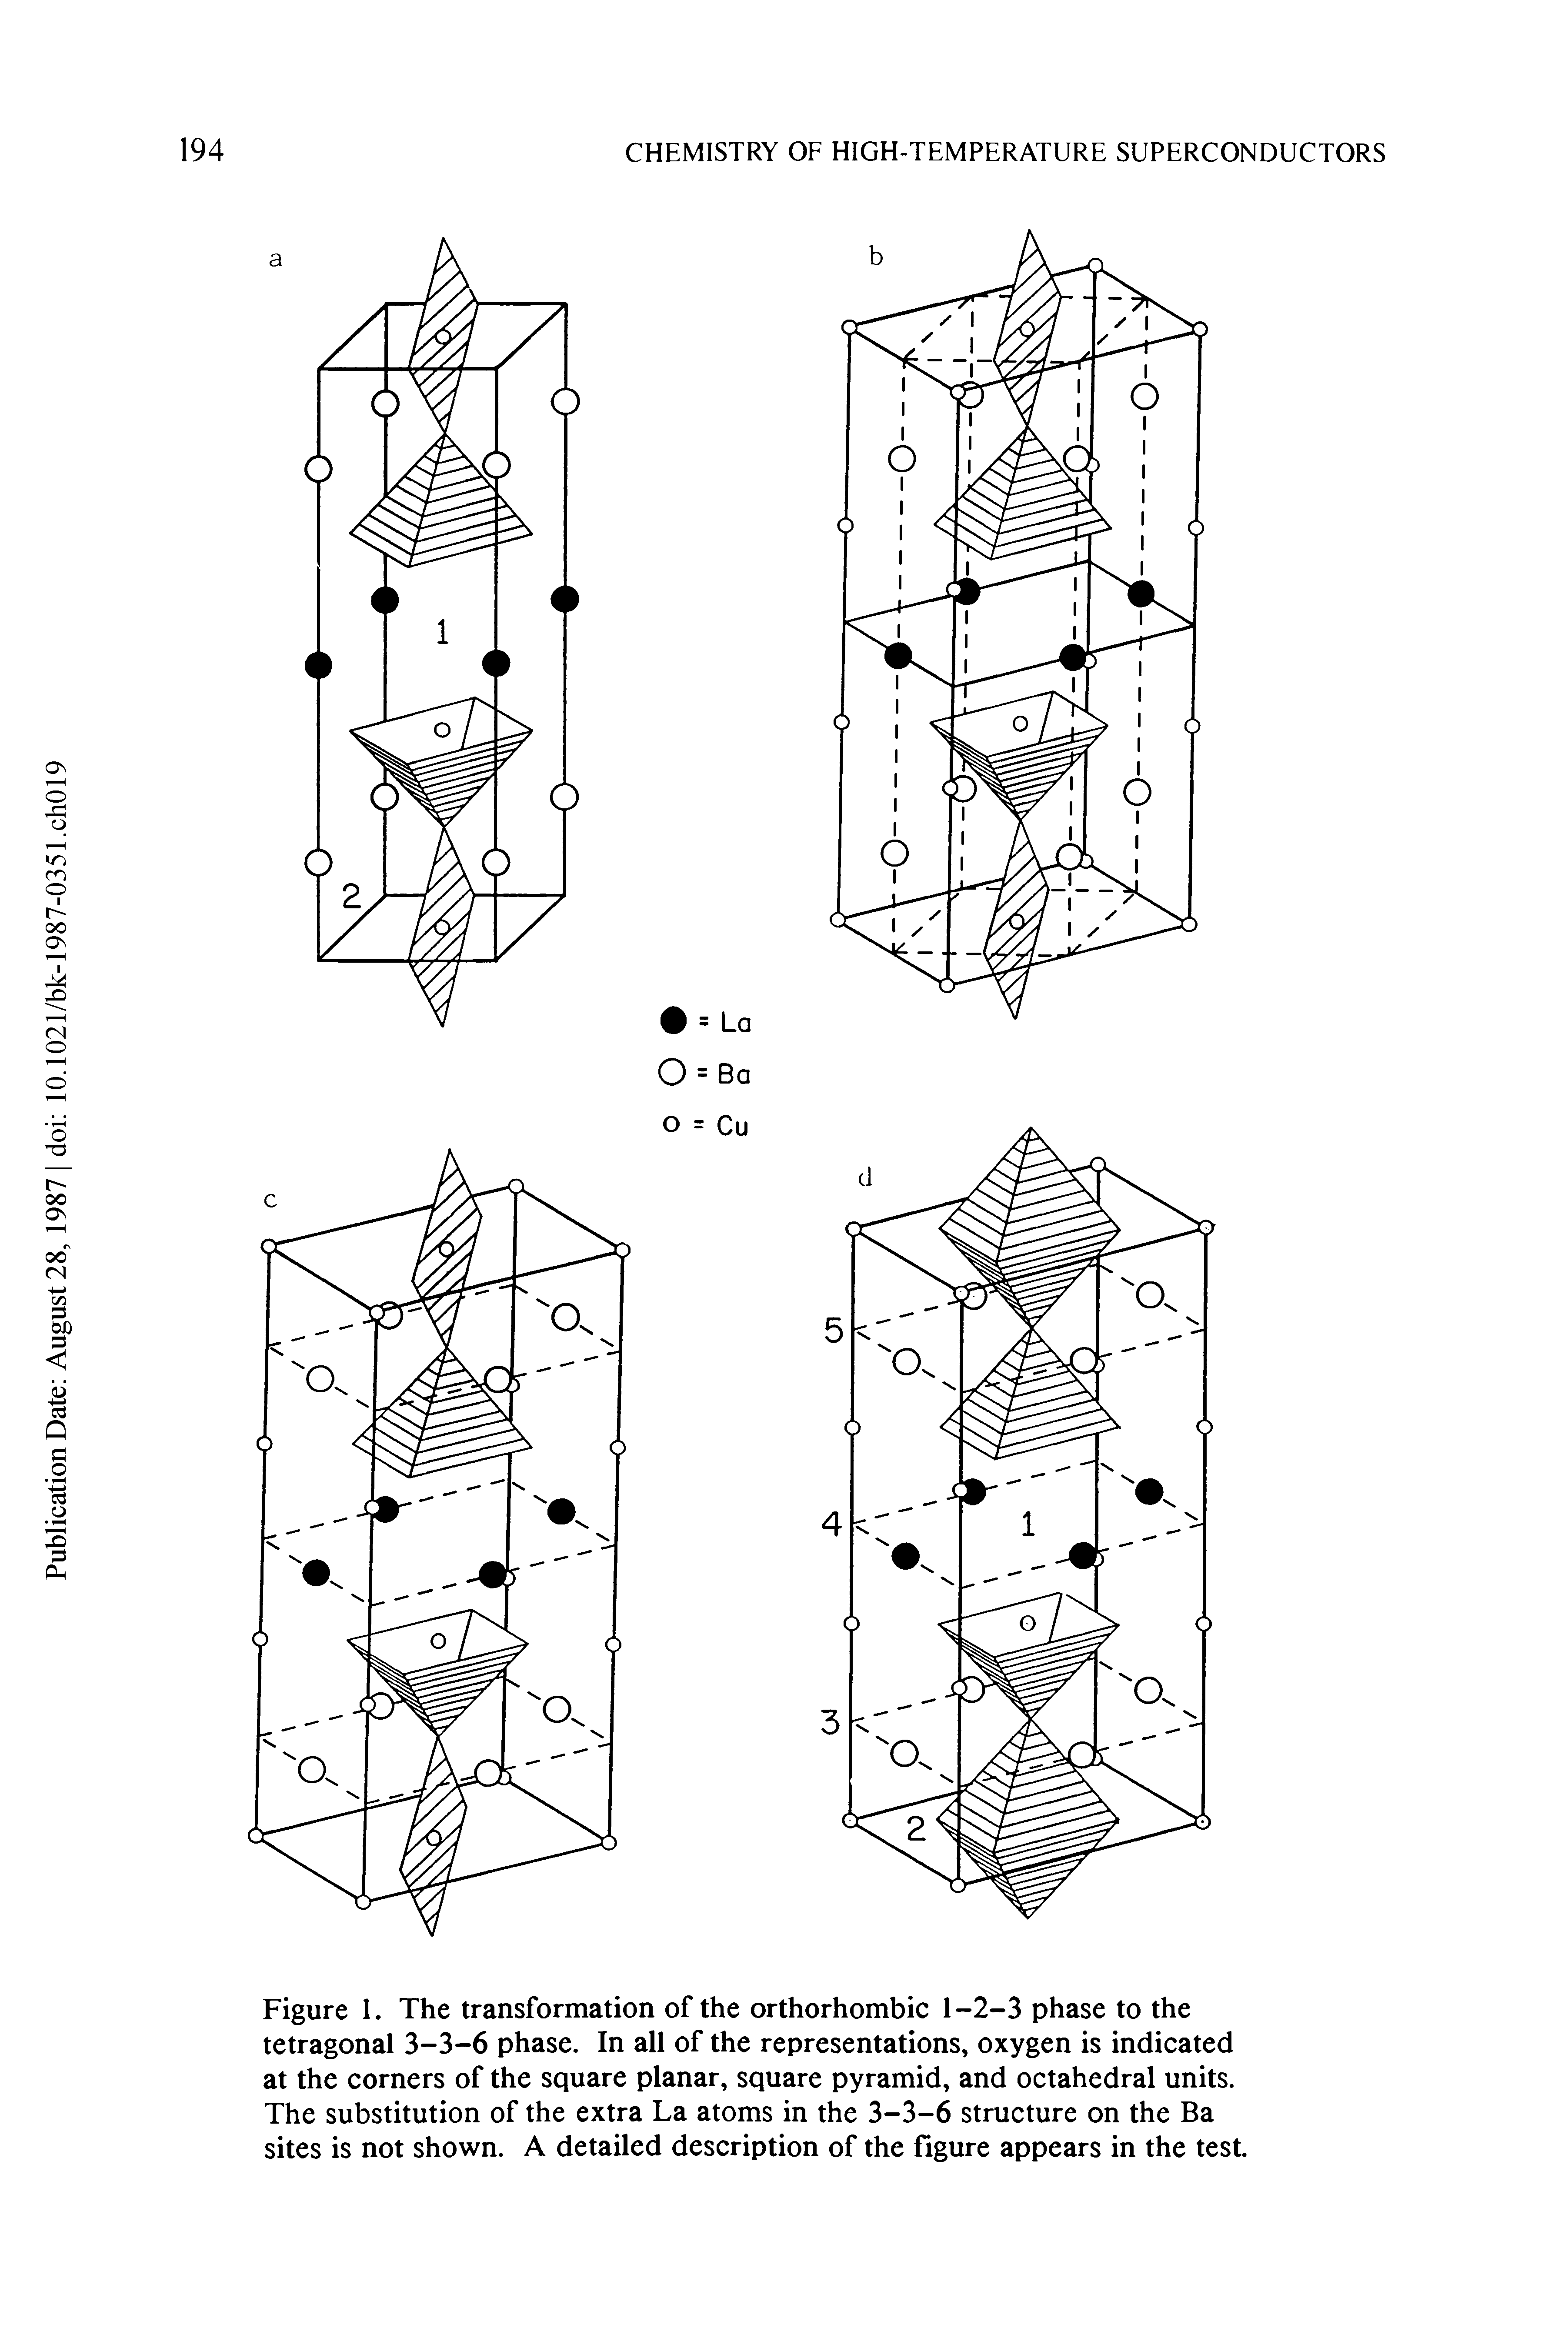 Figure 1. The transformation of the orthorhombic 1-2-3 phase to the tetragonal 3-3-6 phase. In all of the representations, oxygen is indicated at the corners of the square planar, square pyramid, and octahedral units. The substitution of the extra La atoms in the 3-3-6 structure on the Ba sites is not shown. A detailed description of the figure appears in the test.